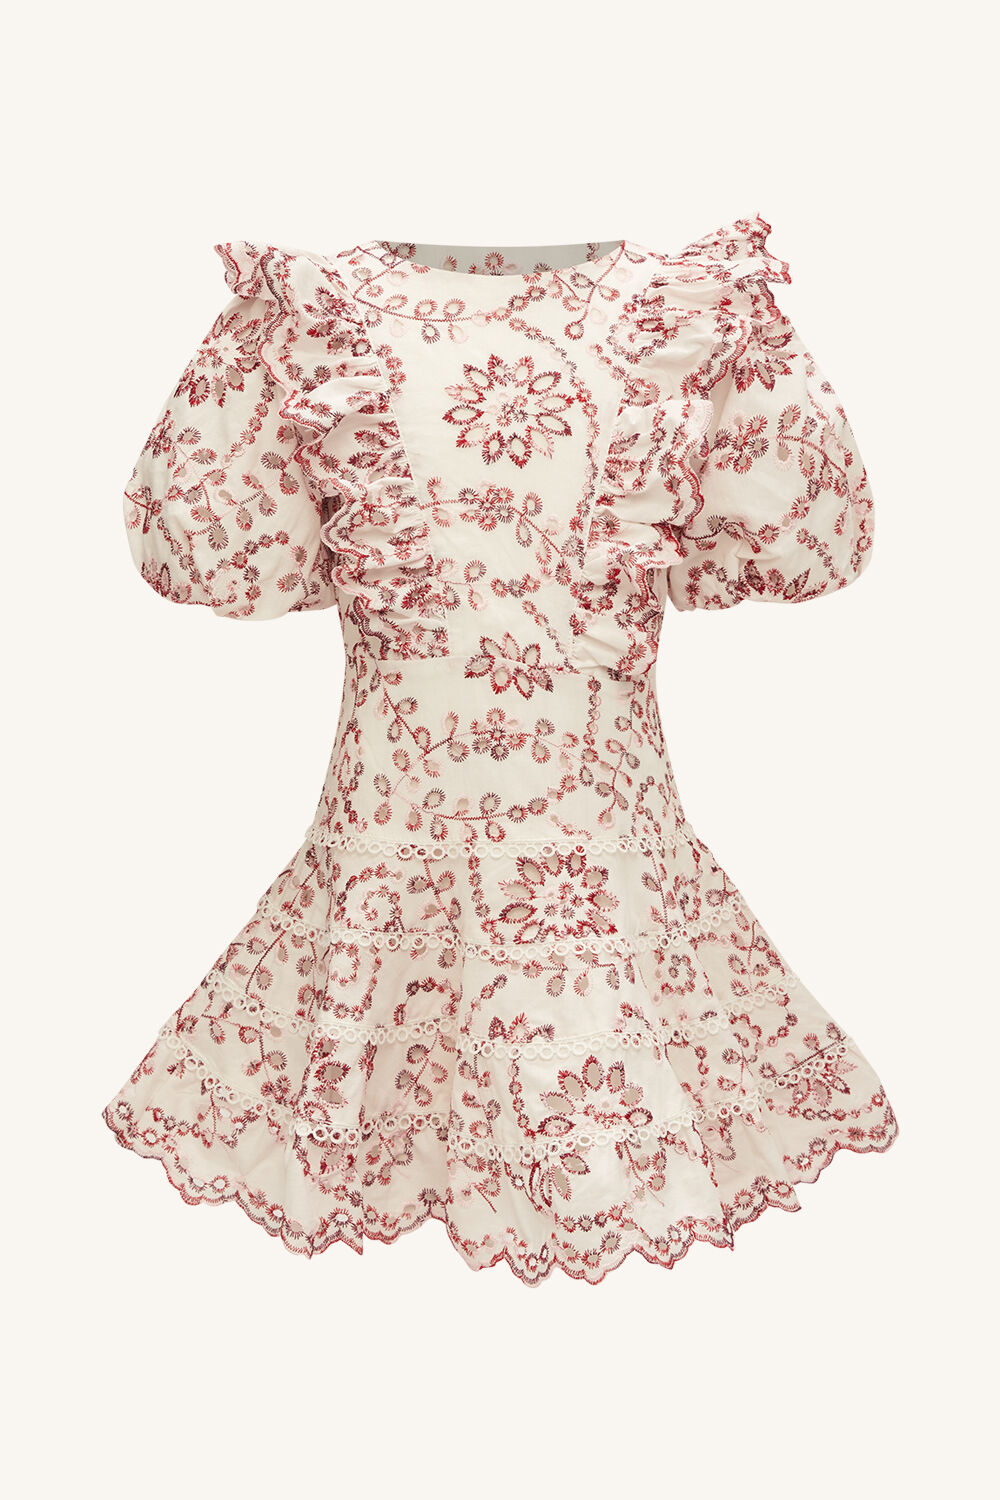 GIRLS AMEILA BRODERIE DRESS in colour POINSETTIA